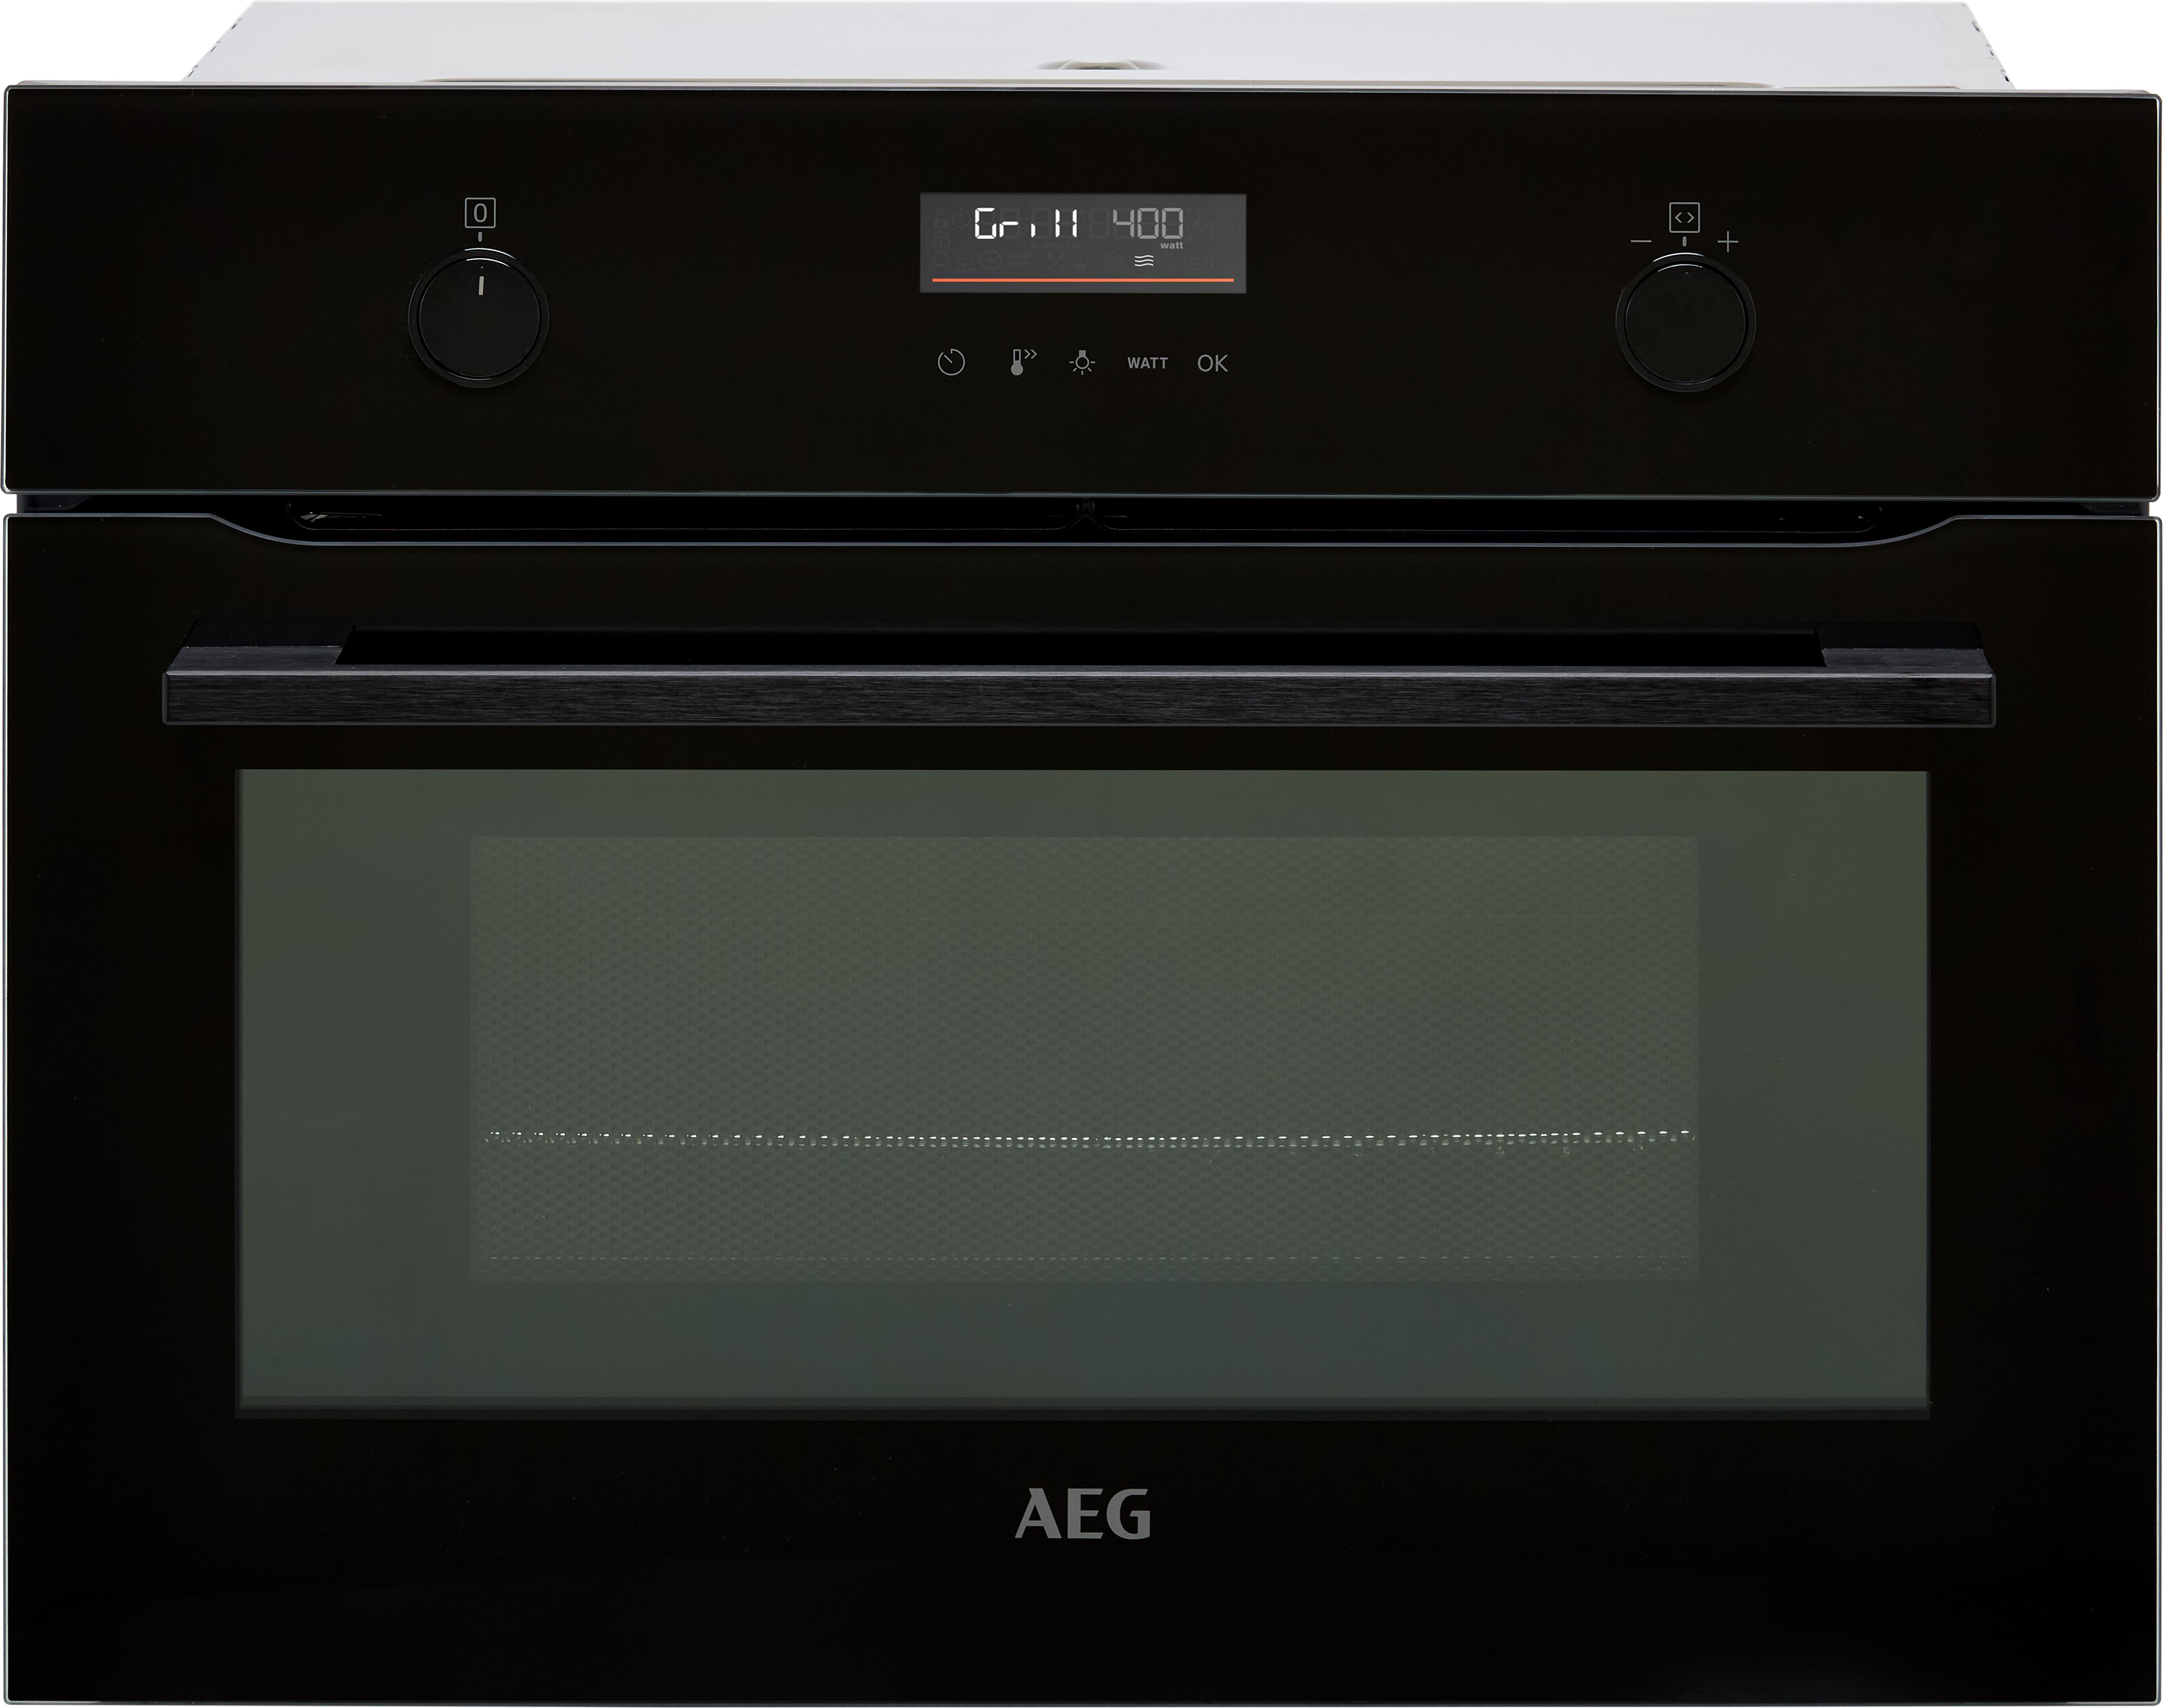 AEG 8000 CombiQuick KMK565060B Built In Compact Electric Single Oven with Microwave Function - Black, Black